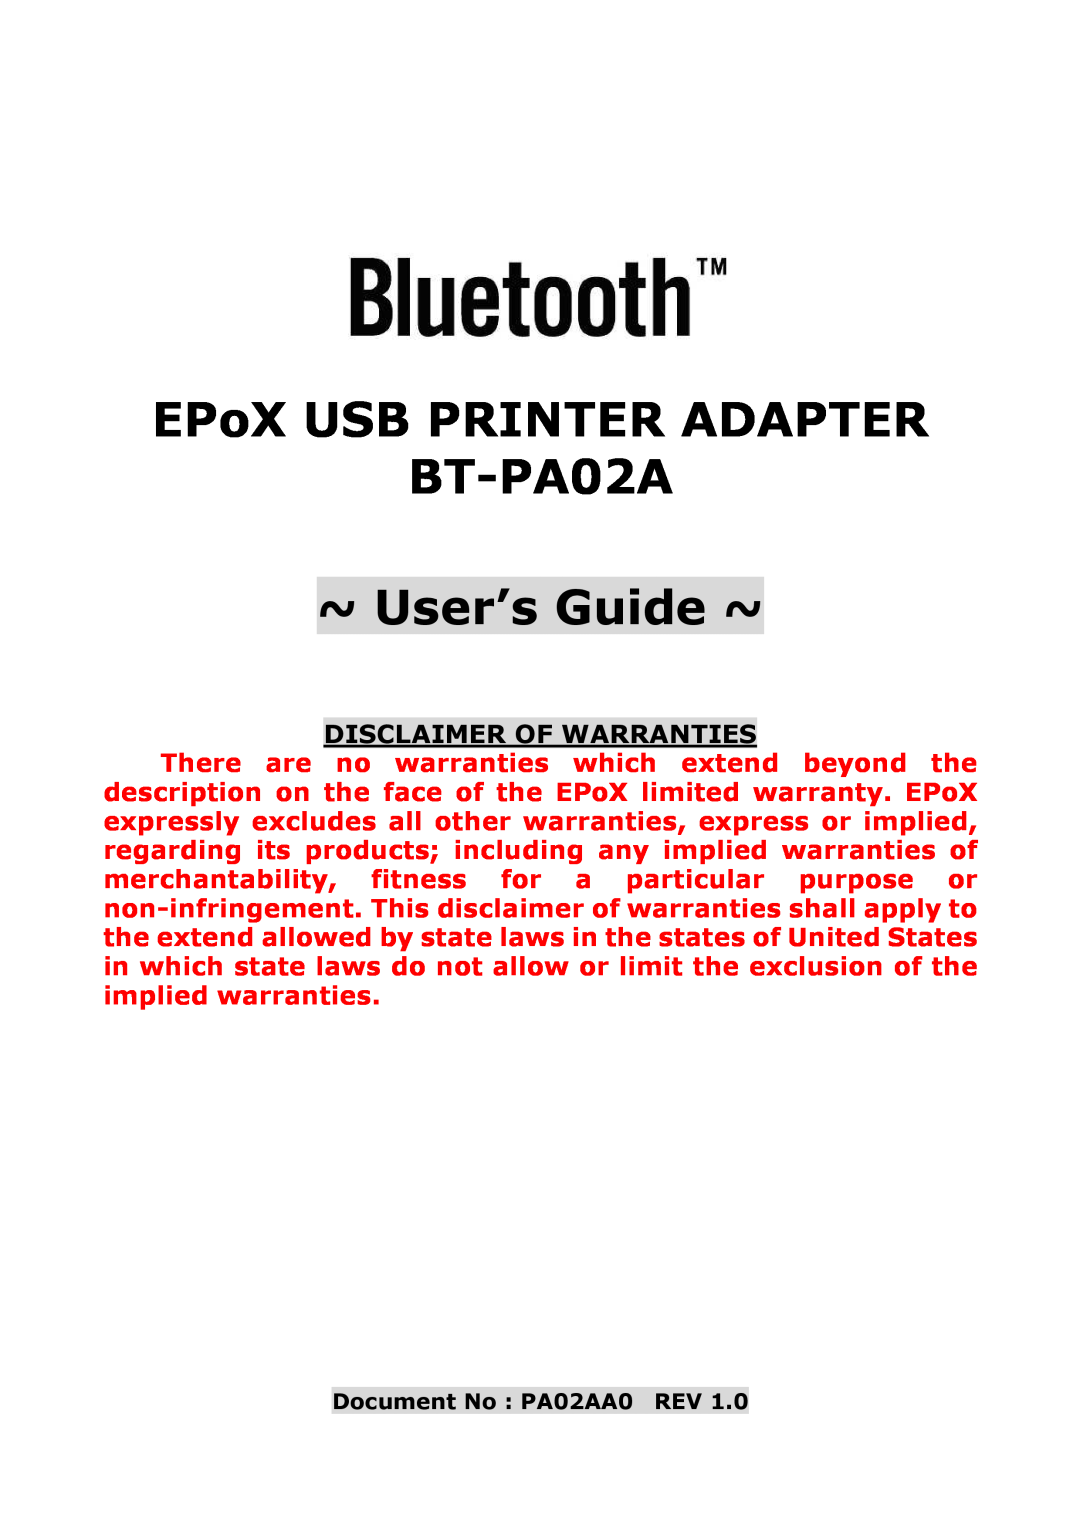 EPoX Computer manual EPoX USB PRINTER ADAPTER BT-PA02A ~ User’s Guide ~, Disclaimer Of Warranties 